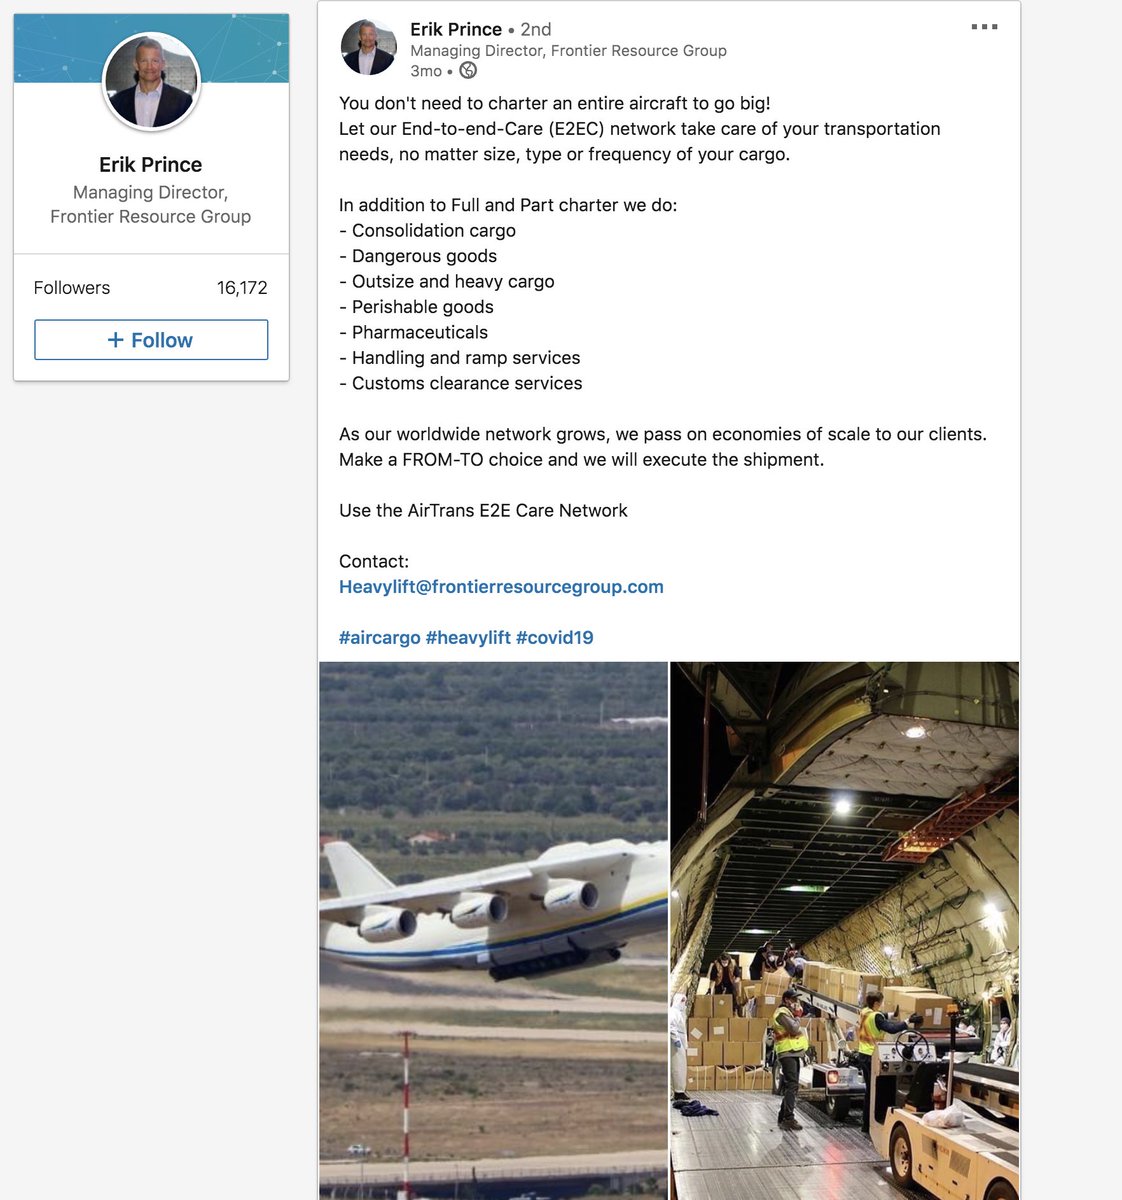 Here's a post from Erik Prince on LinkedIn from 3 months ago promoting Airtrans services